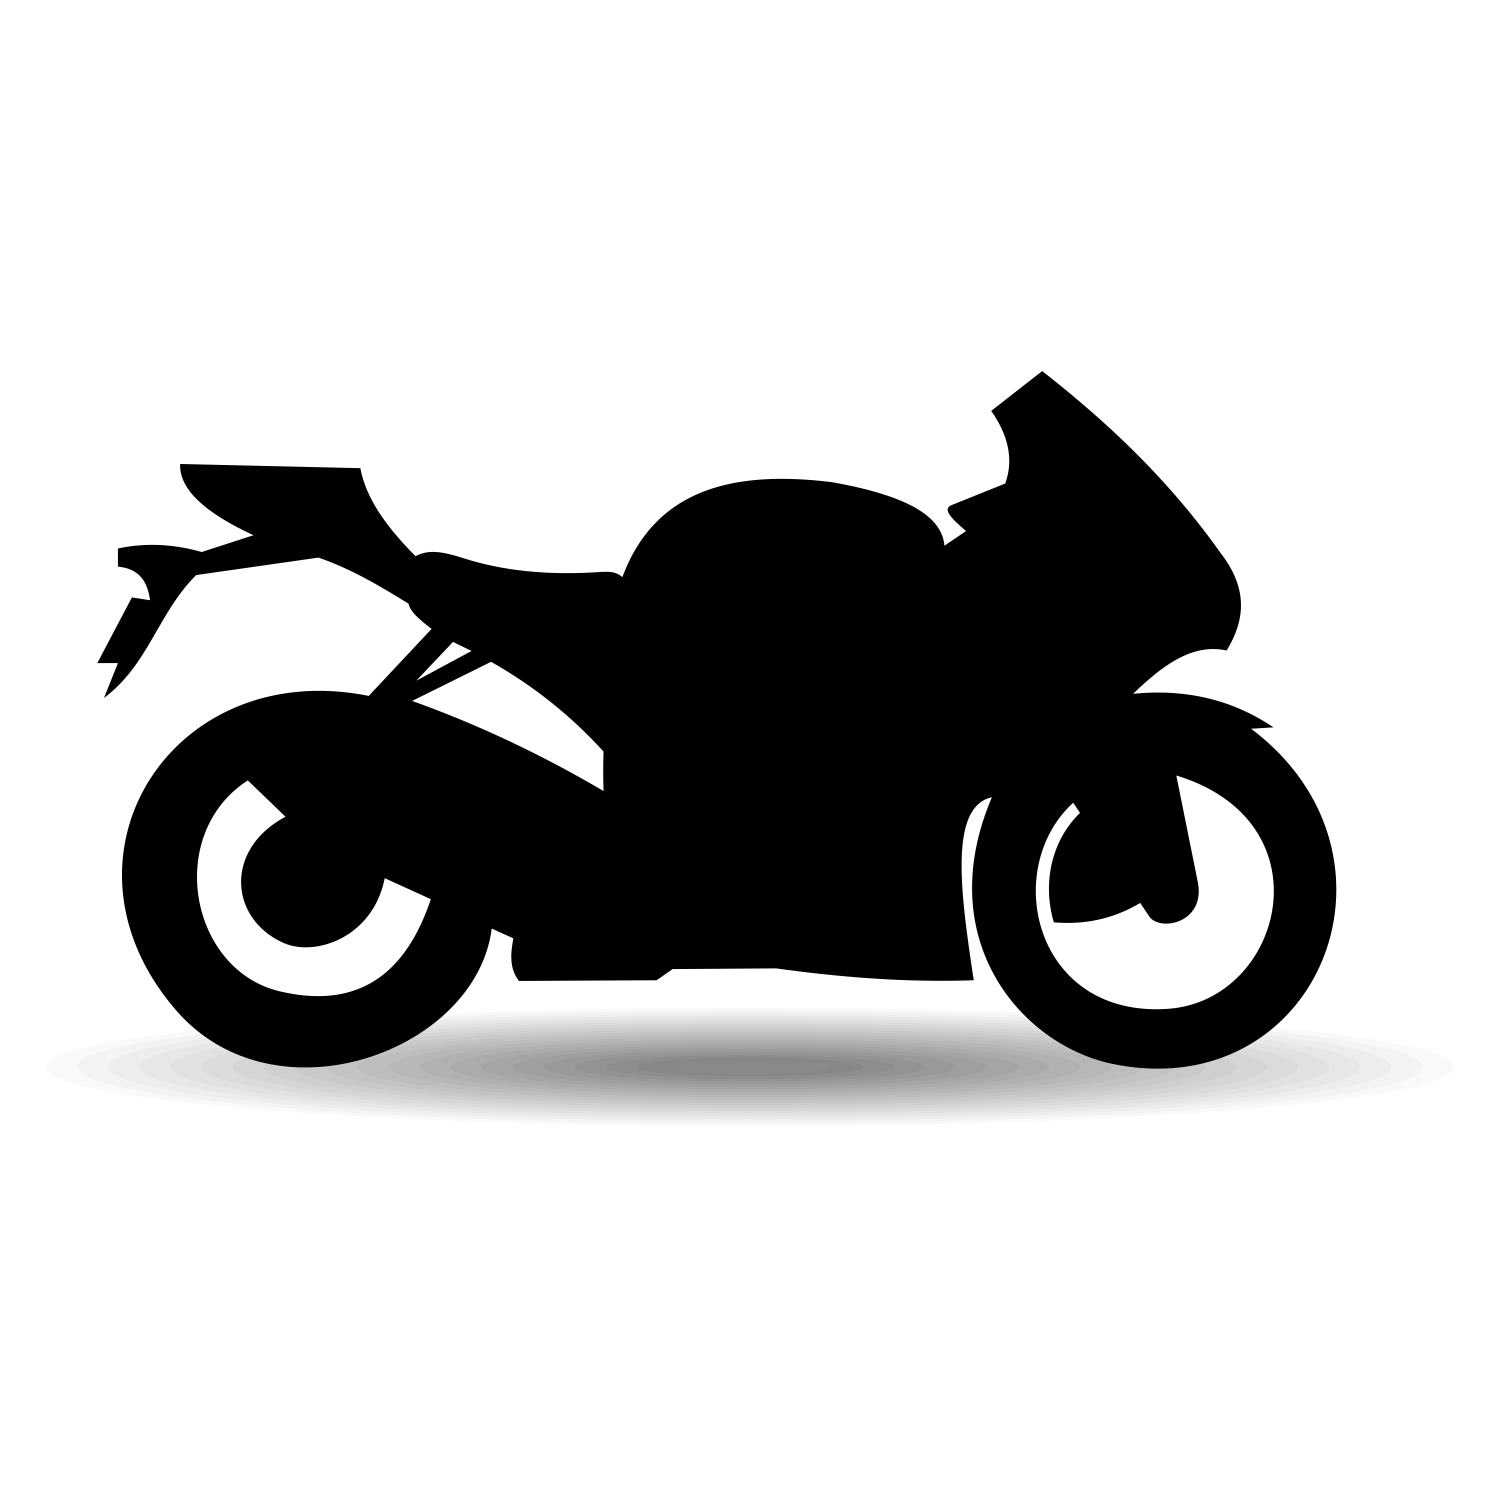 free vector motorcycle clipart - photo #40